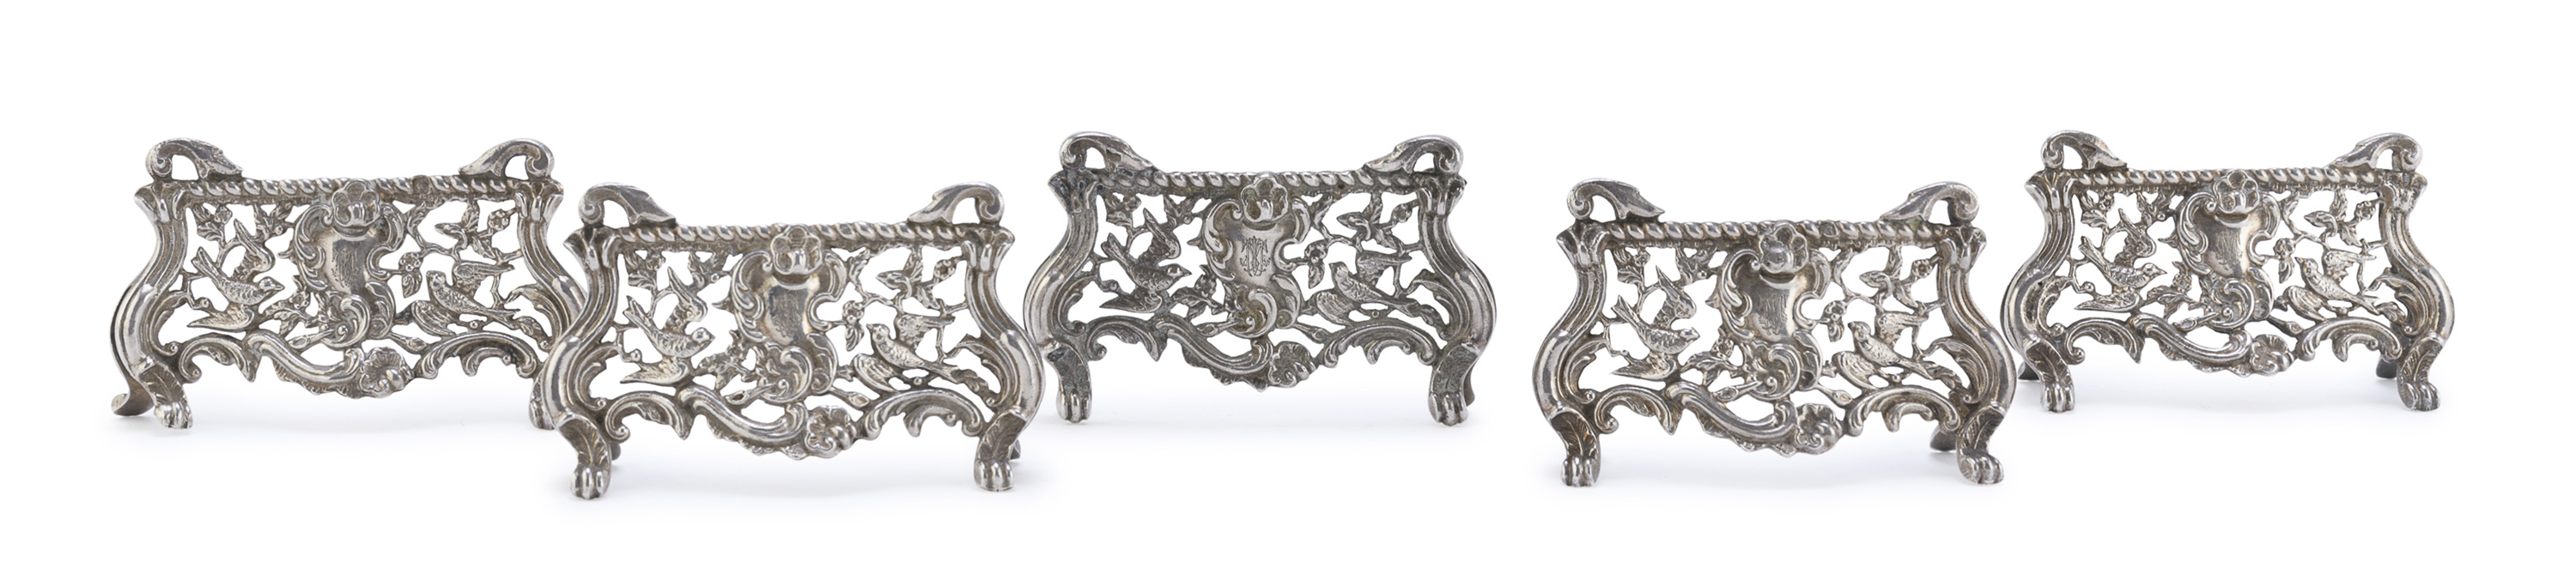 FIVE SILVER PLACEHOLDER END OF THE 19TH CENTURY